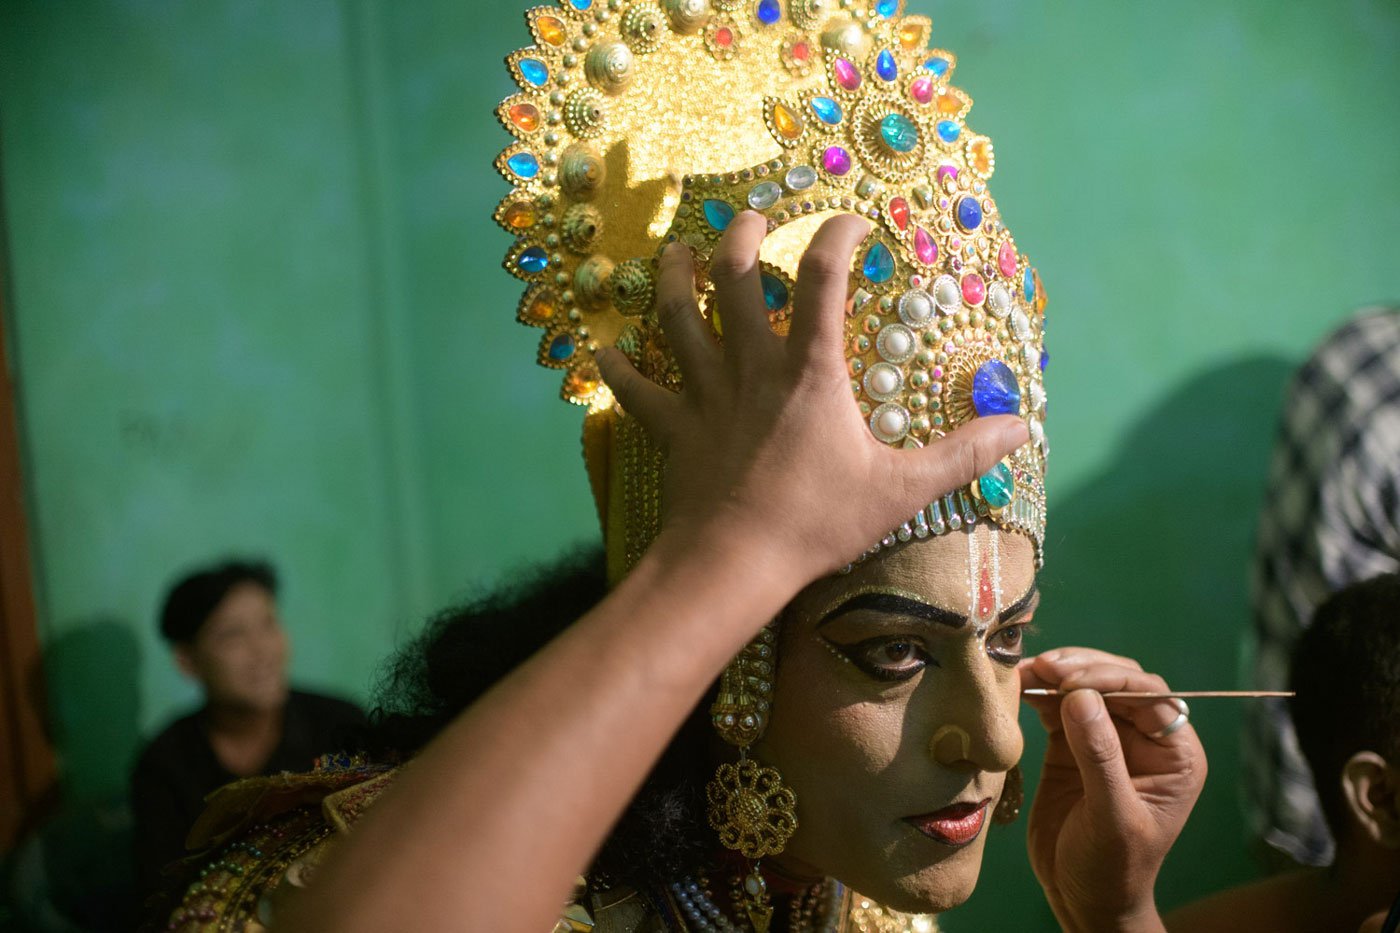 Mukta Dutta, who plays the role of Vishnu is getting his makeup done